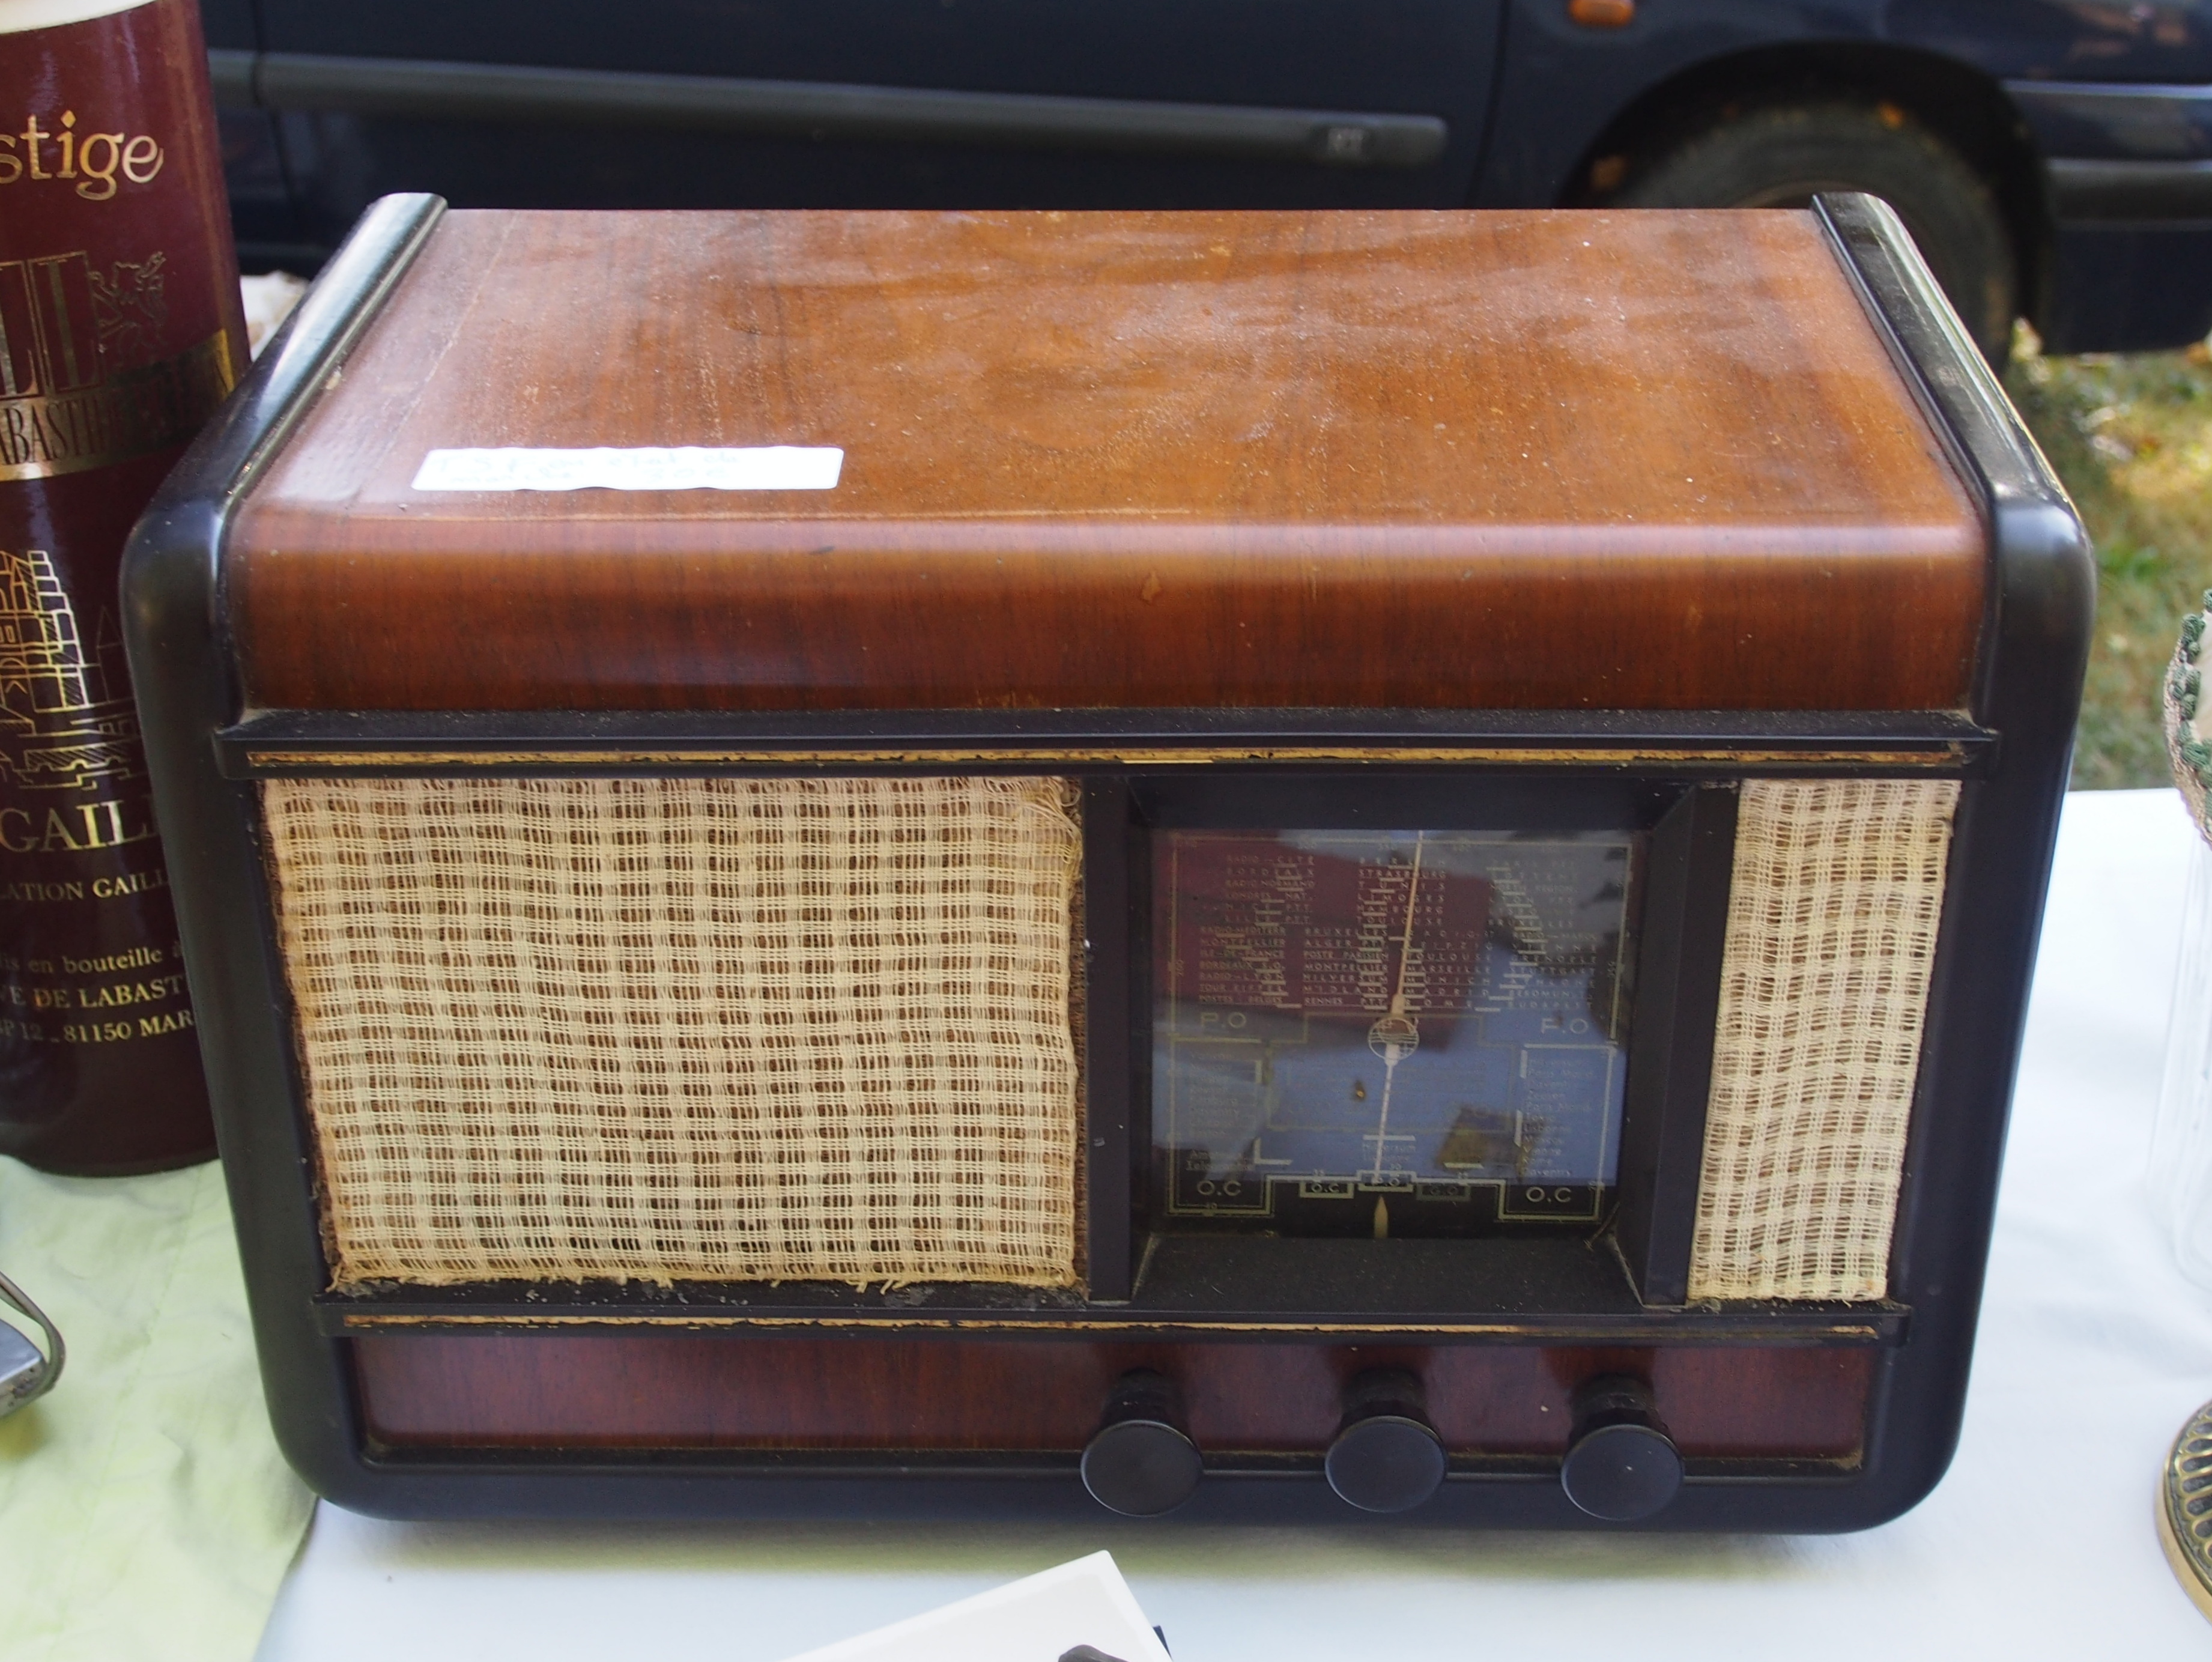 Old radio receiver in France, pic1